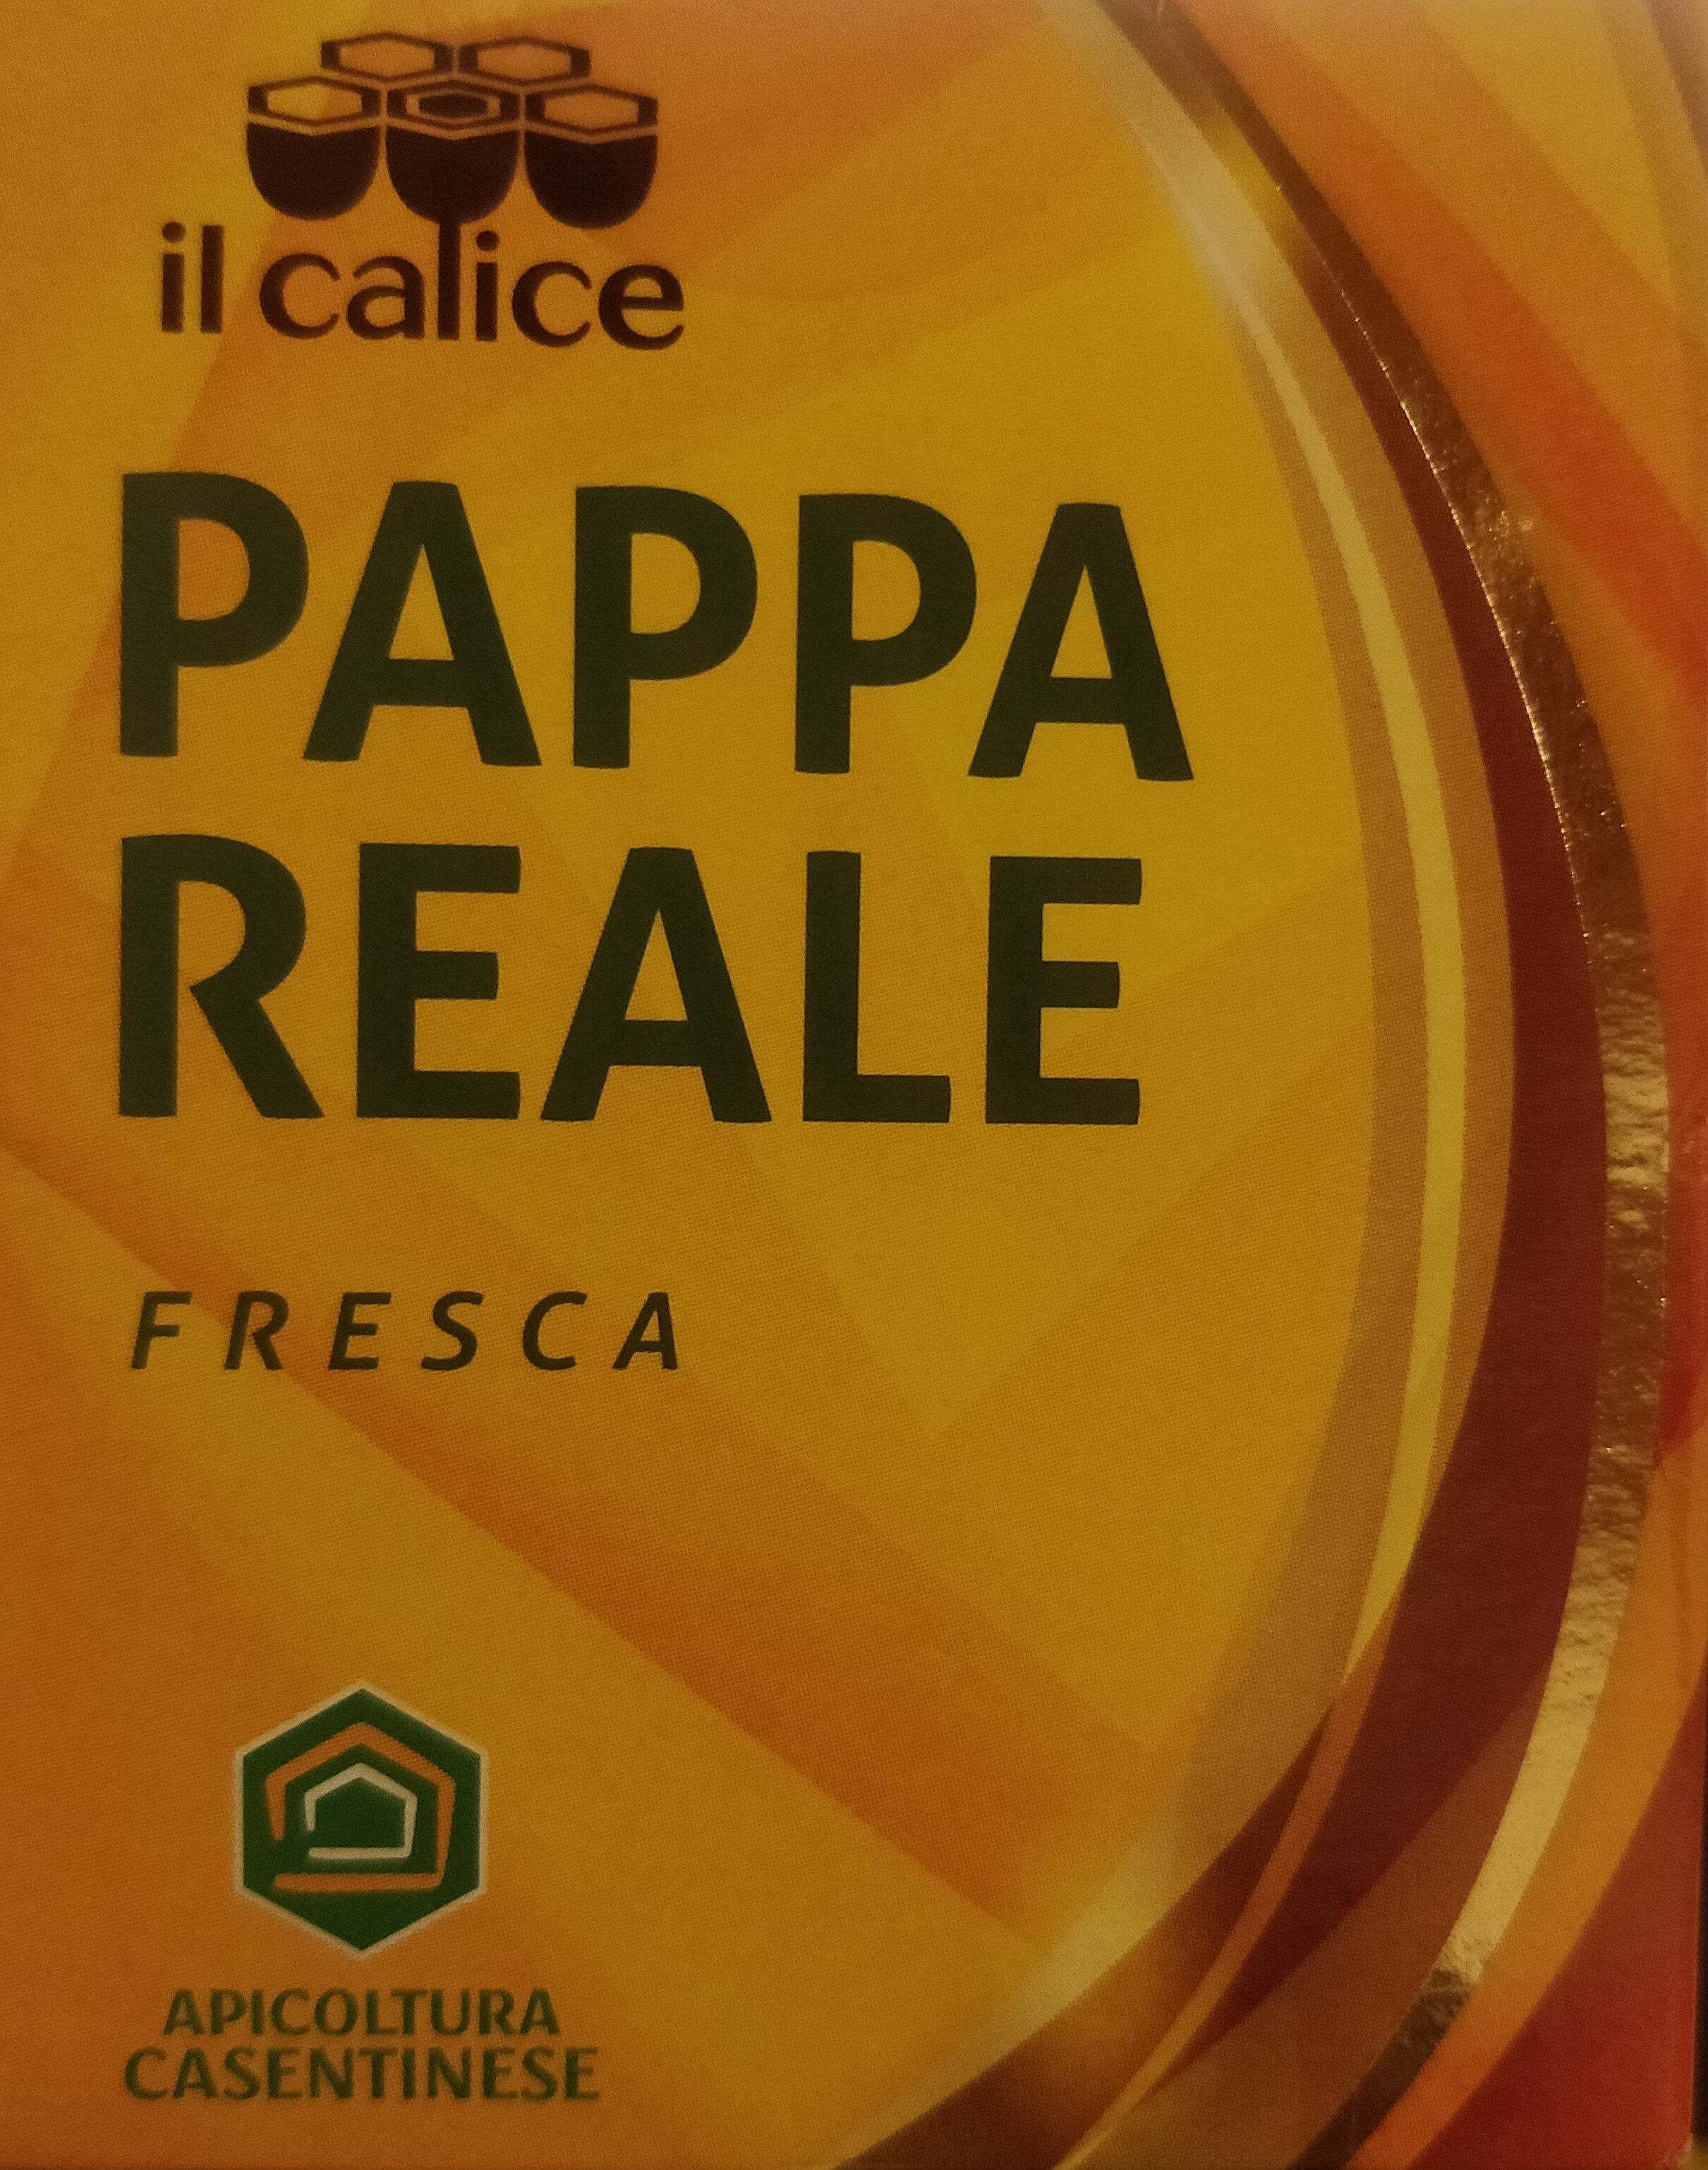 Pappa reale fresca - Product - it